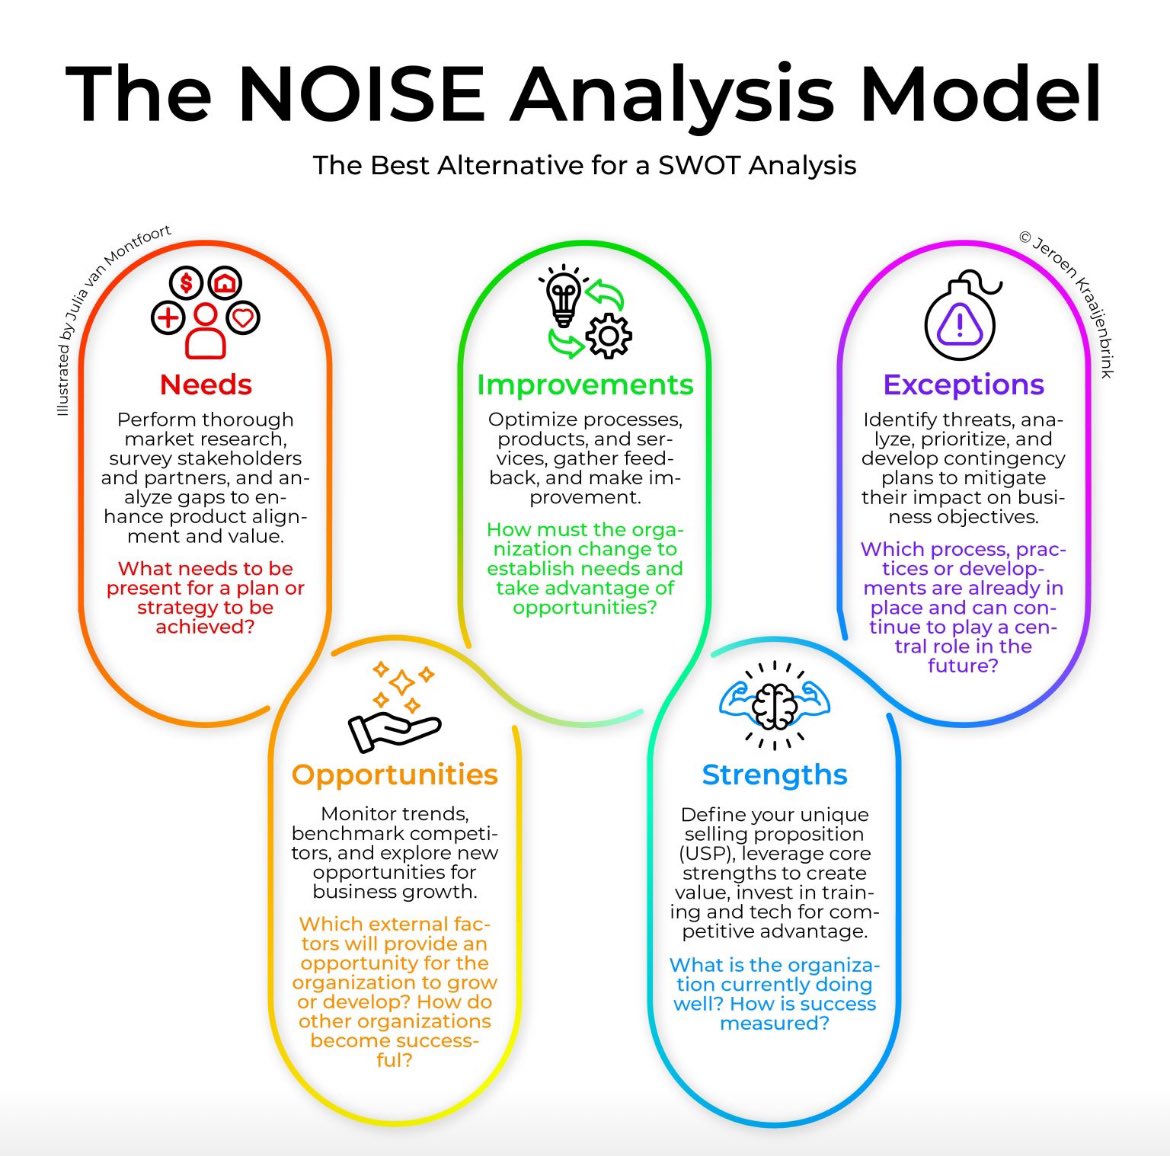 Alternative to #SWOT? Probably a #NOISE Analysis,taking in an organization’s Needs, Opportunities, Improvements, Strengths, & Exceptions. Credits: @JKraaijenbrink provides a more structured  & action-oriented approach to strategic planning. #organizationaldevelopment
#leadership